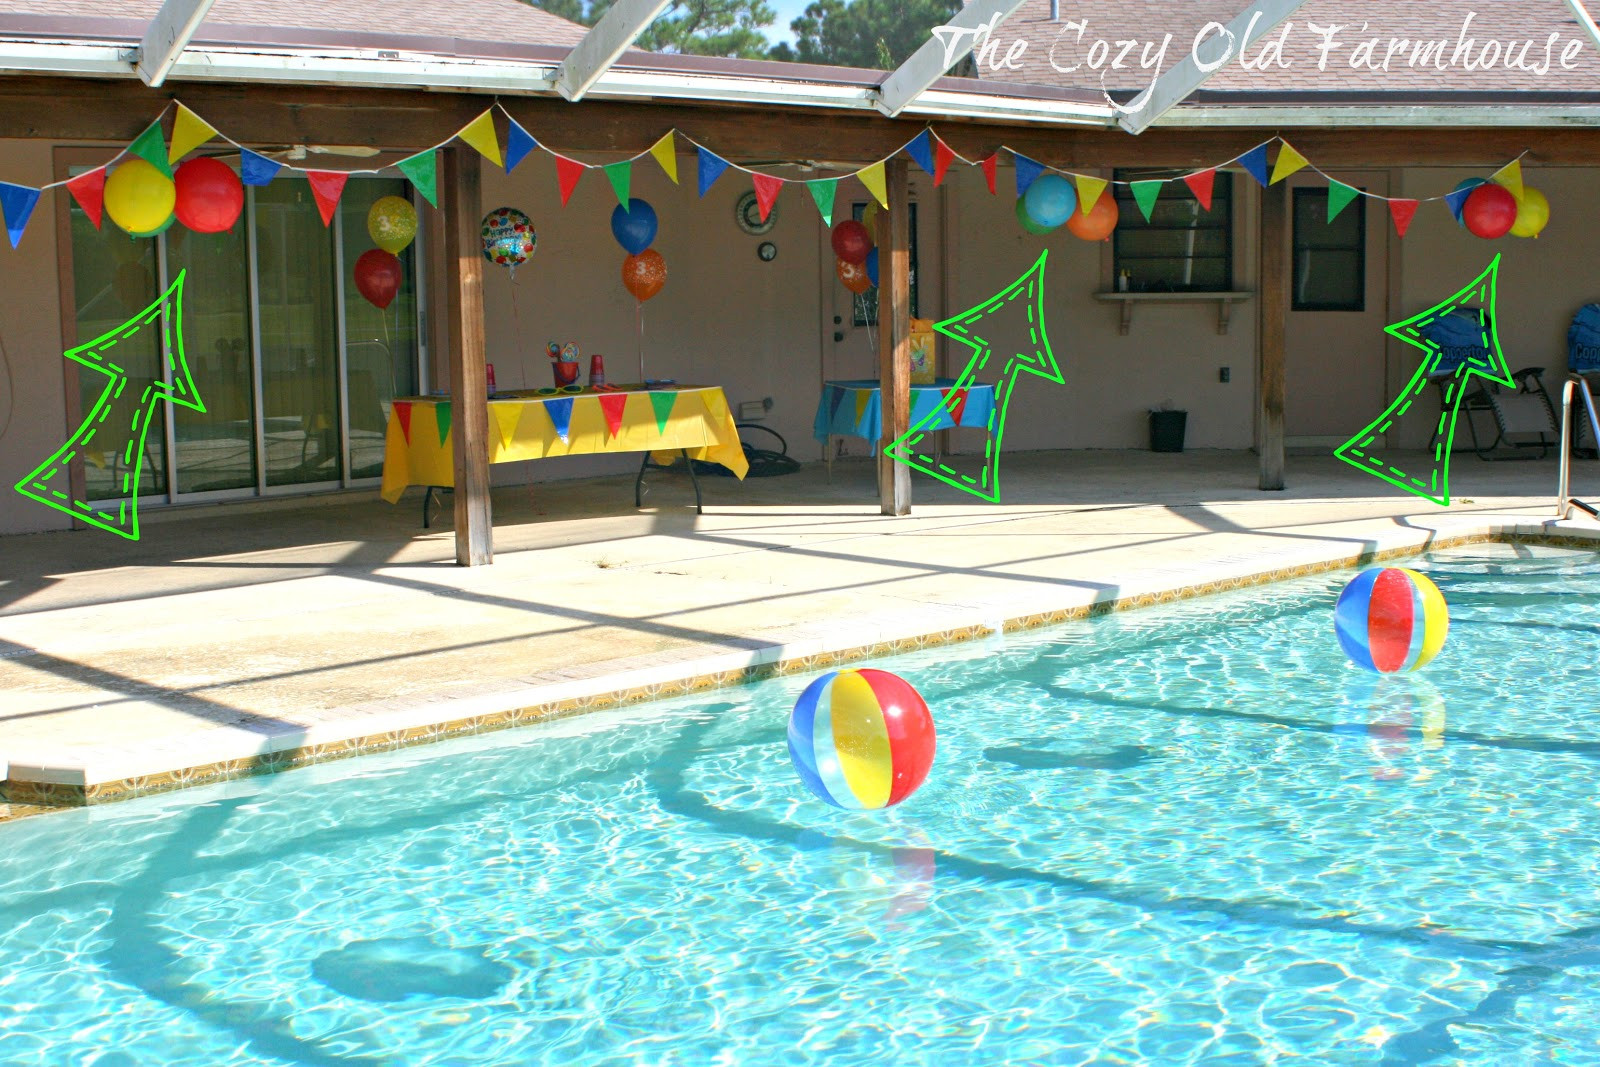 Pool Party Birthday Ideas
 The Cozy Old "Farmhouse" Simple and Bud Friendly Pool